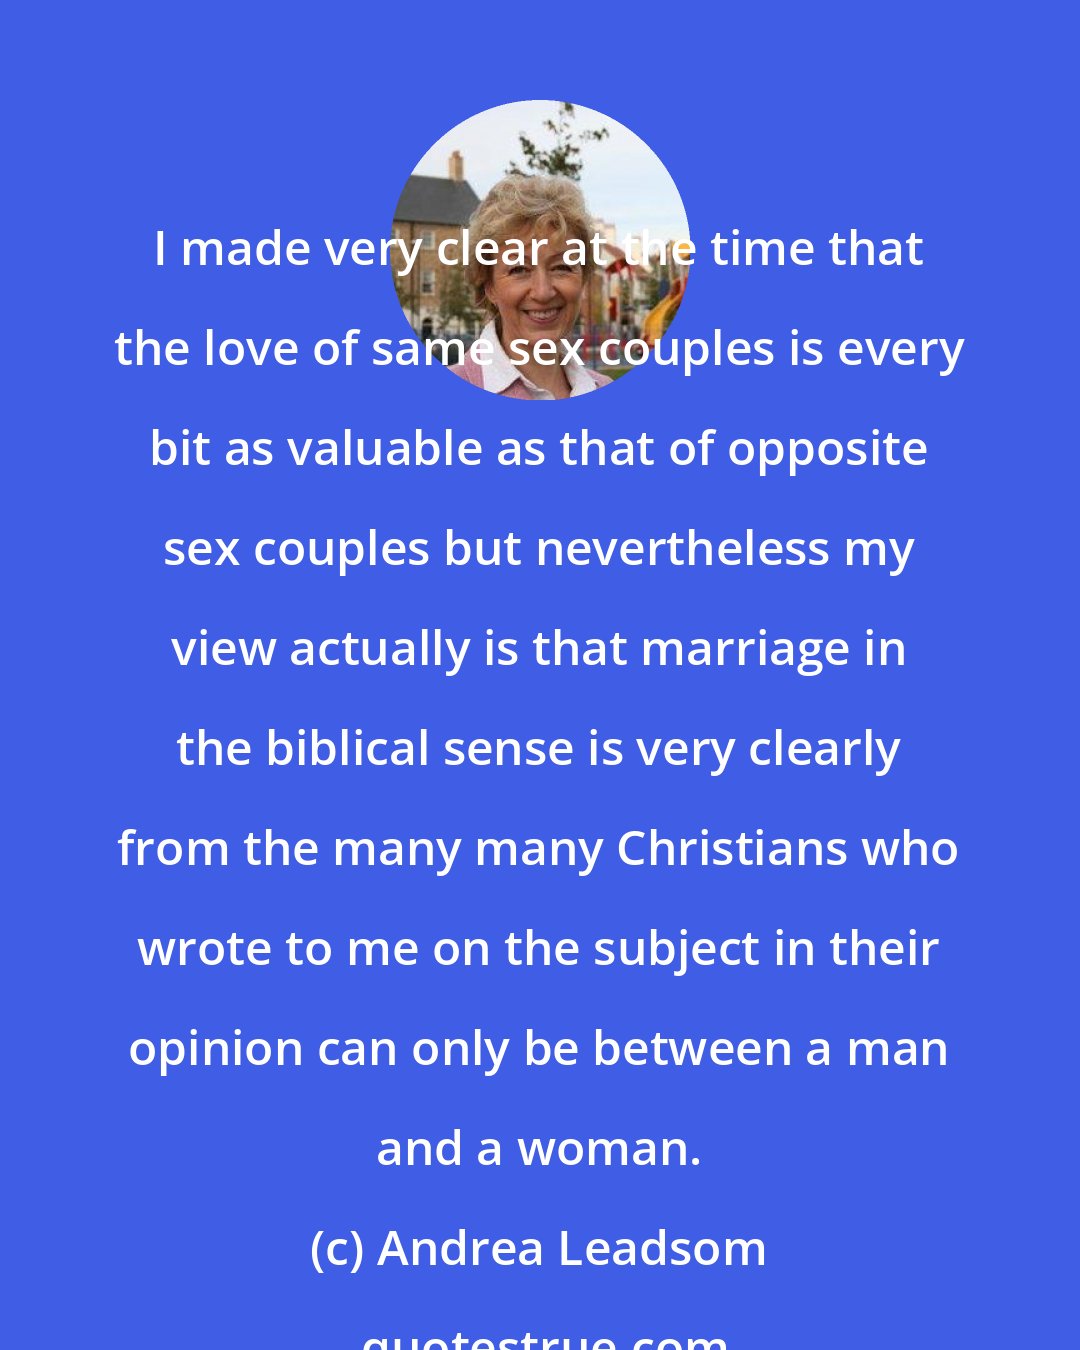 Andrea Leadsom: I made very clear at the time that the love of same sex couples is every bit as valuable as that of opposite sex couples but nevertheless my view actually is that marriage in the biblical sense is very clearly from the many many Christians who wrote to me on the subject in their opinion can only be between a man and a woman.